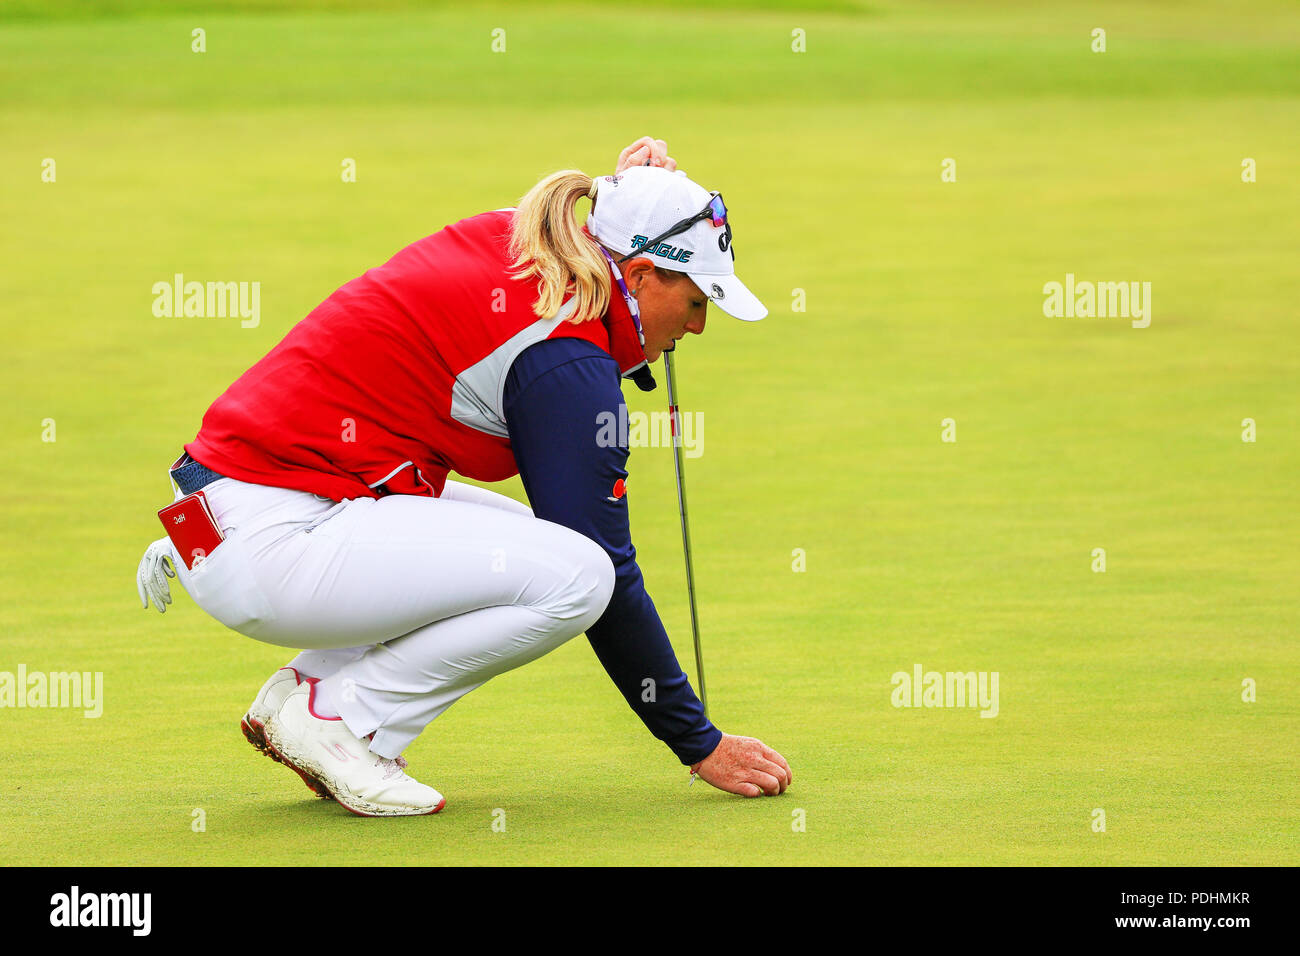 Gleneagles, Scotland, UK. 10th August, 2018. The Fourball Match Play continues with the pairing of Catriona Matthew and Holly Clyburn representing Great Britain playing against Cajsa Persson and Linda Wessberg of Sweden. Clyburn setting up the putt at the third hole Credit: Findlay/Alamy Live News Stock Photo